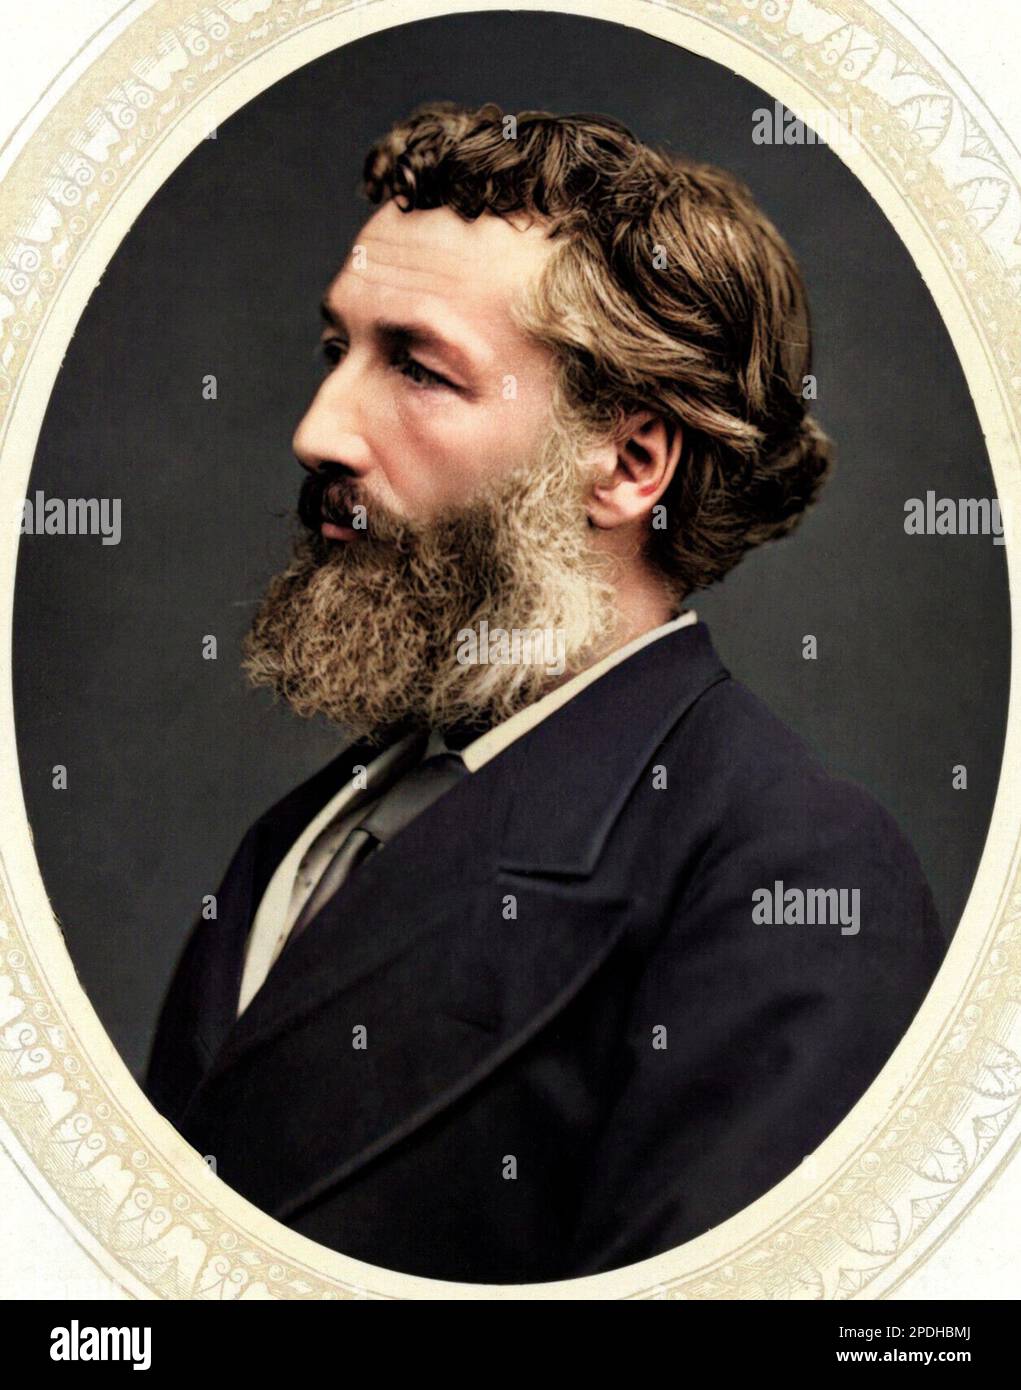 1875 ca , GREAT BRITAIN : The celebrated british painter and sculptor  Lord Frederic LEIGHTON ( 1830 - 1896 ) , influenced by the Pre-Raphaellite movement . Portrait by Lock & Whitfield , London . DIGITALLY COLORIZED . -  HISTORY - FOTO STORICHE - PAINTER - PITTORE - ARTS - ART - ARTE - beard - barba - profilo - profile - LGBTQ - GAY --- ARCHIVIO GBB Stock Photo